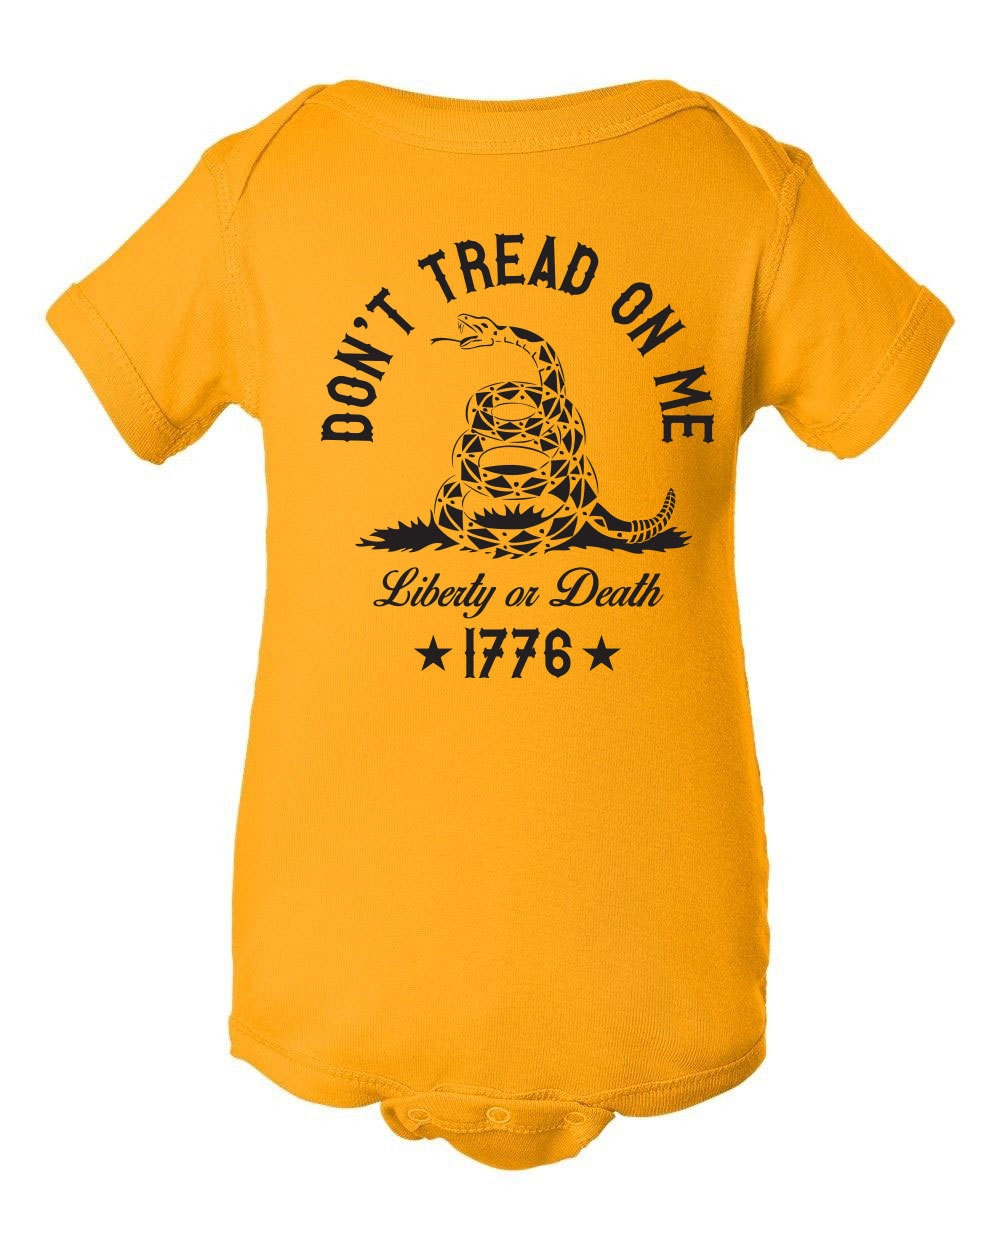 Don't Tread on Me liberty or death 1776 american by InkItTees